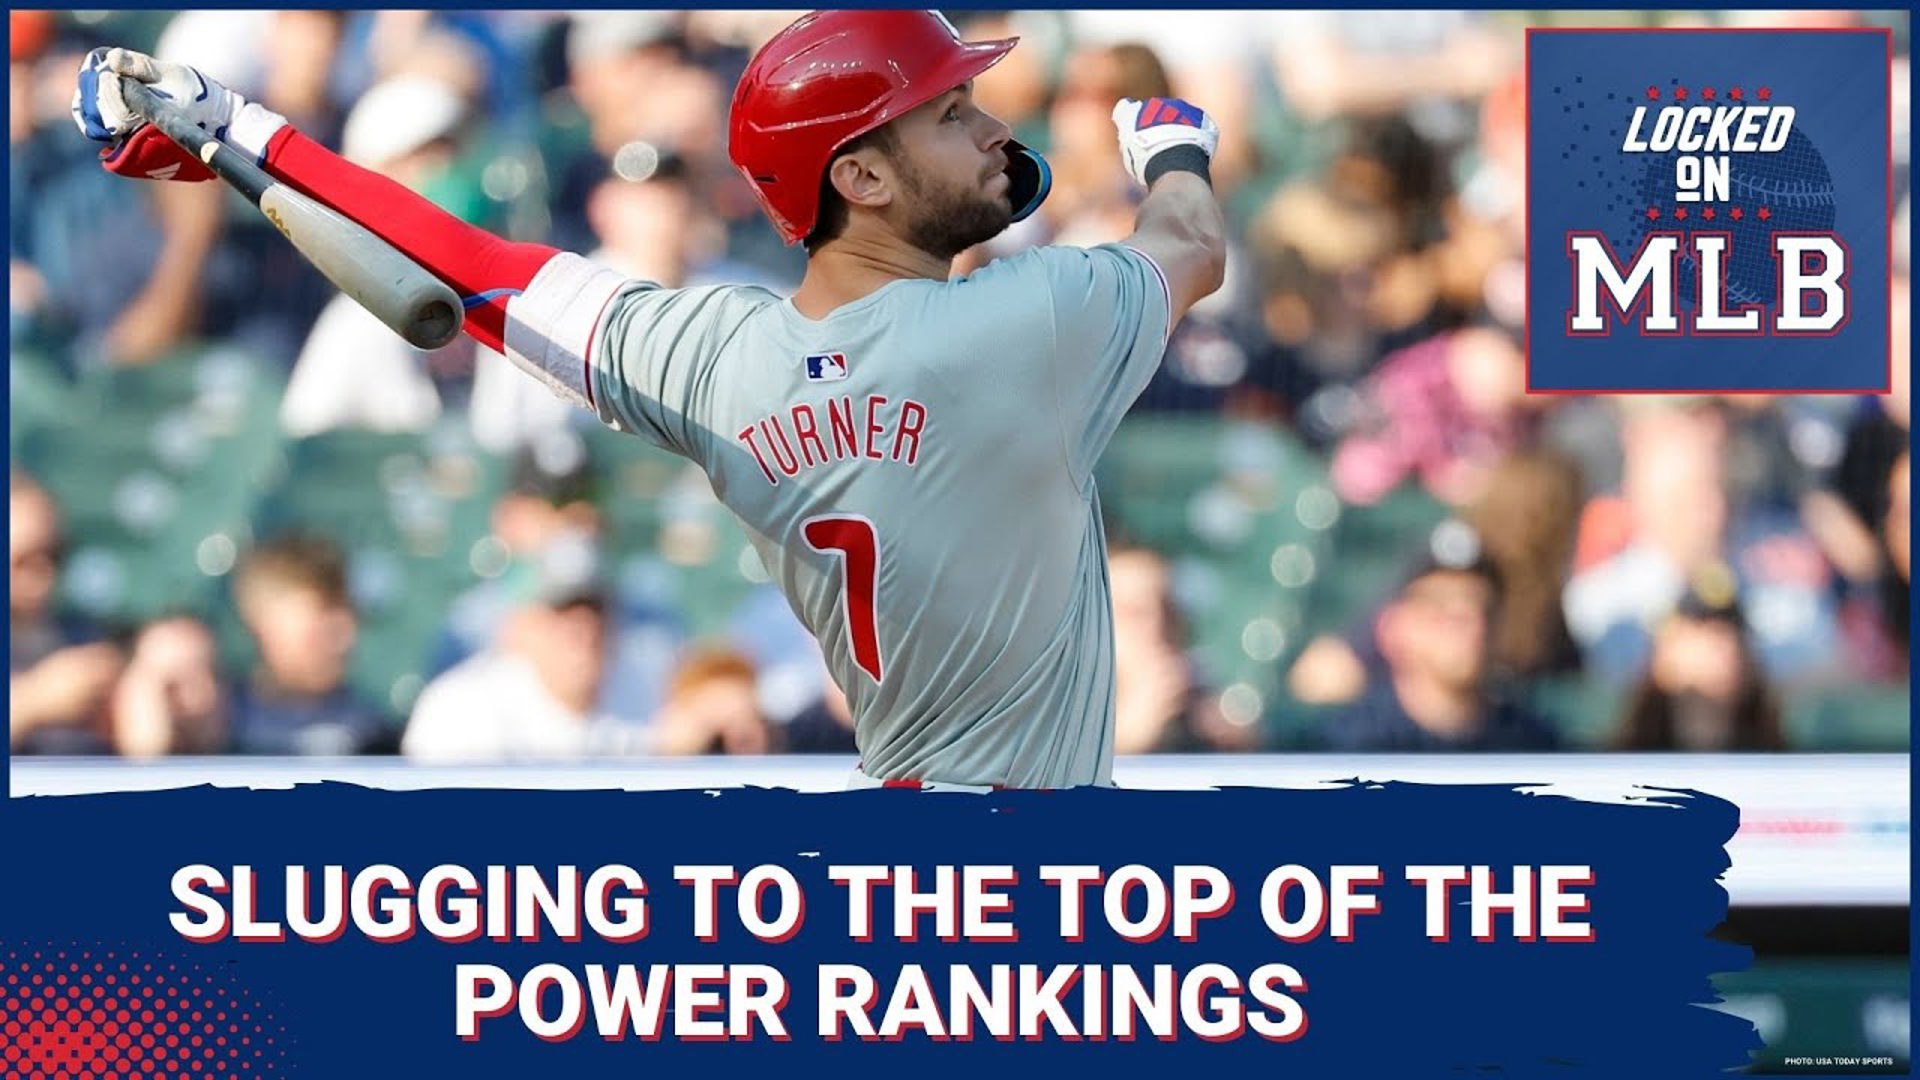 The latest Power Rankings are in and the teams at the top and bottom remain the same but the Red Sox and Astros are surging up the tally.